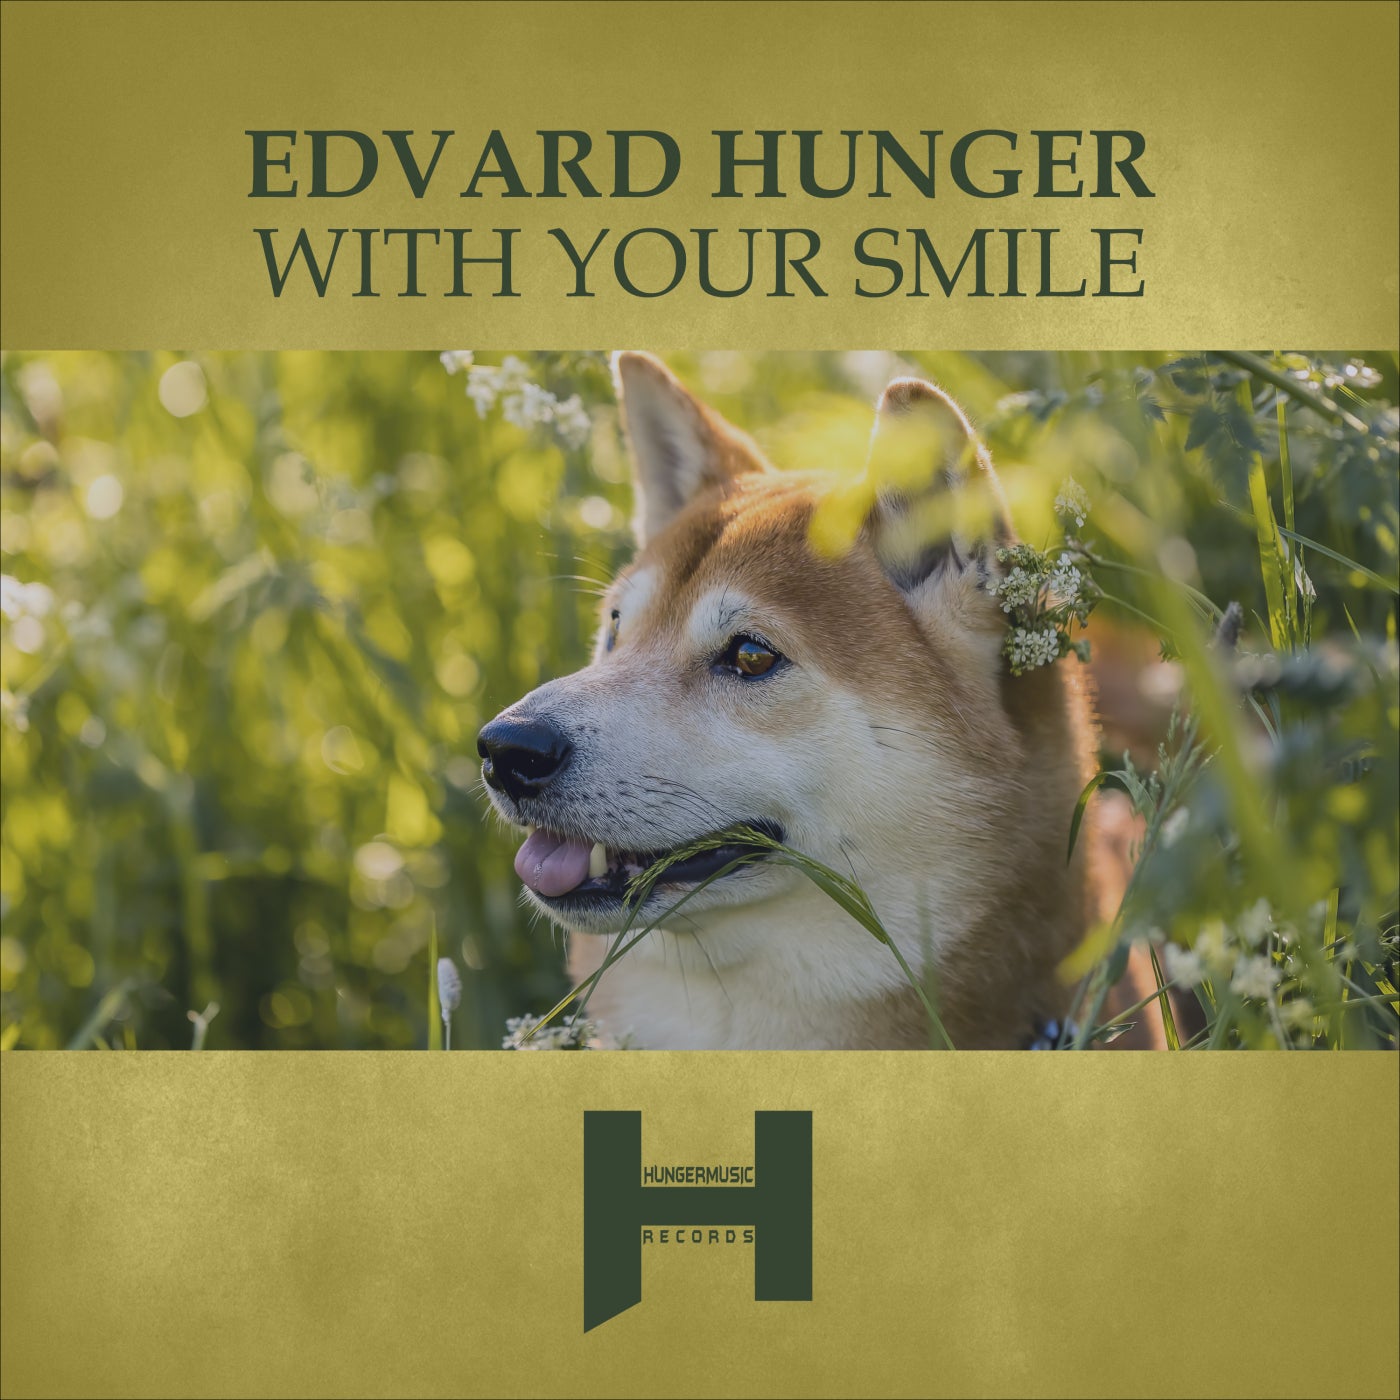 Edvard Hunger - With Your Smile [Hungermusic Records]